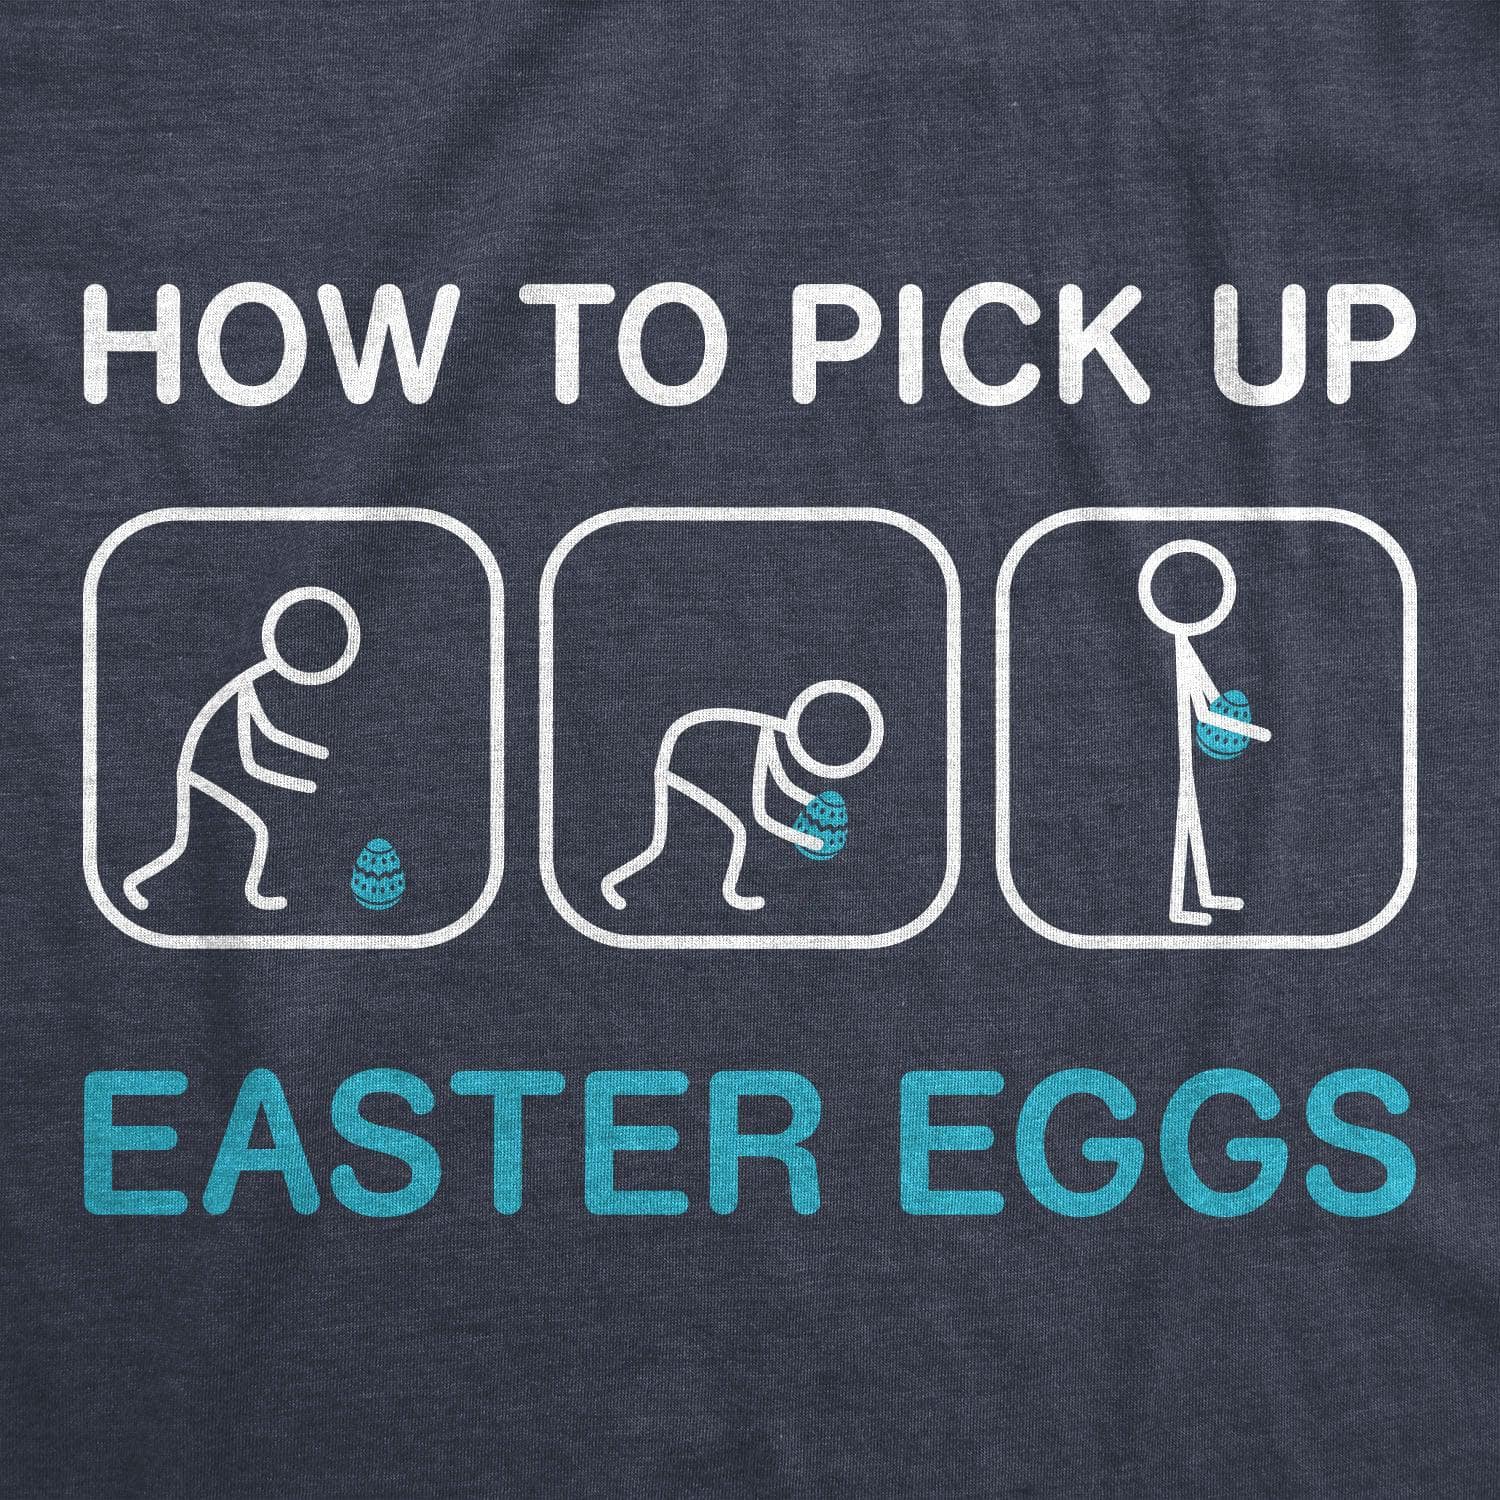 How To Pick Up Easter Eggs Women's Tshirt  -  Crazy Dog T-Shirts